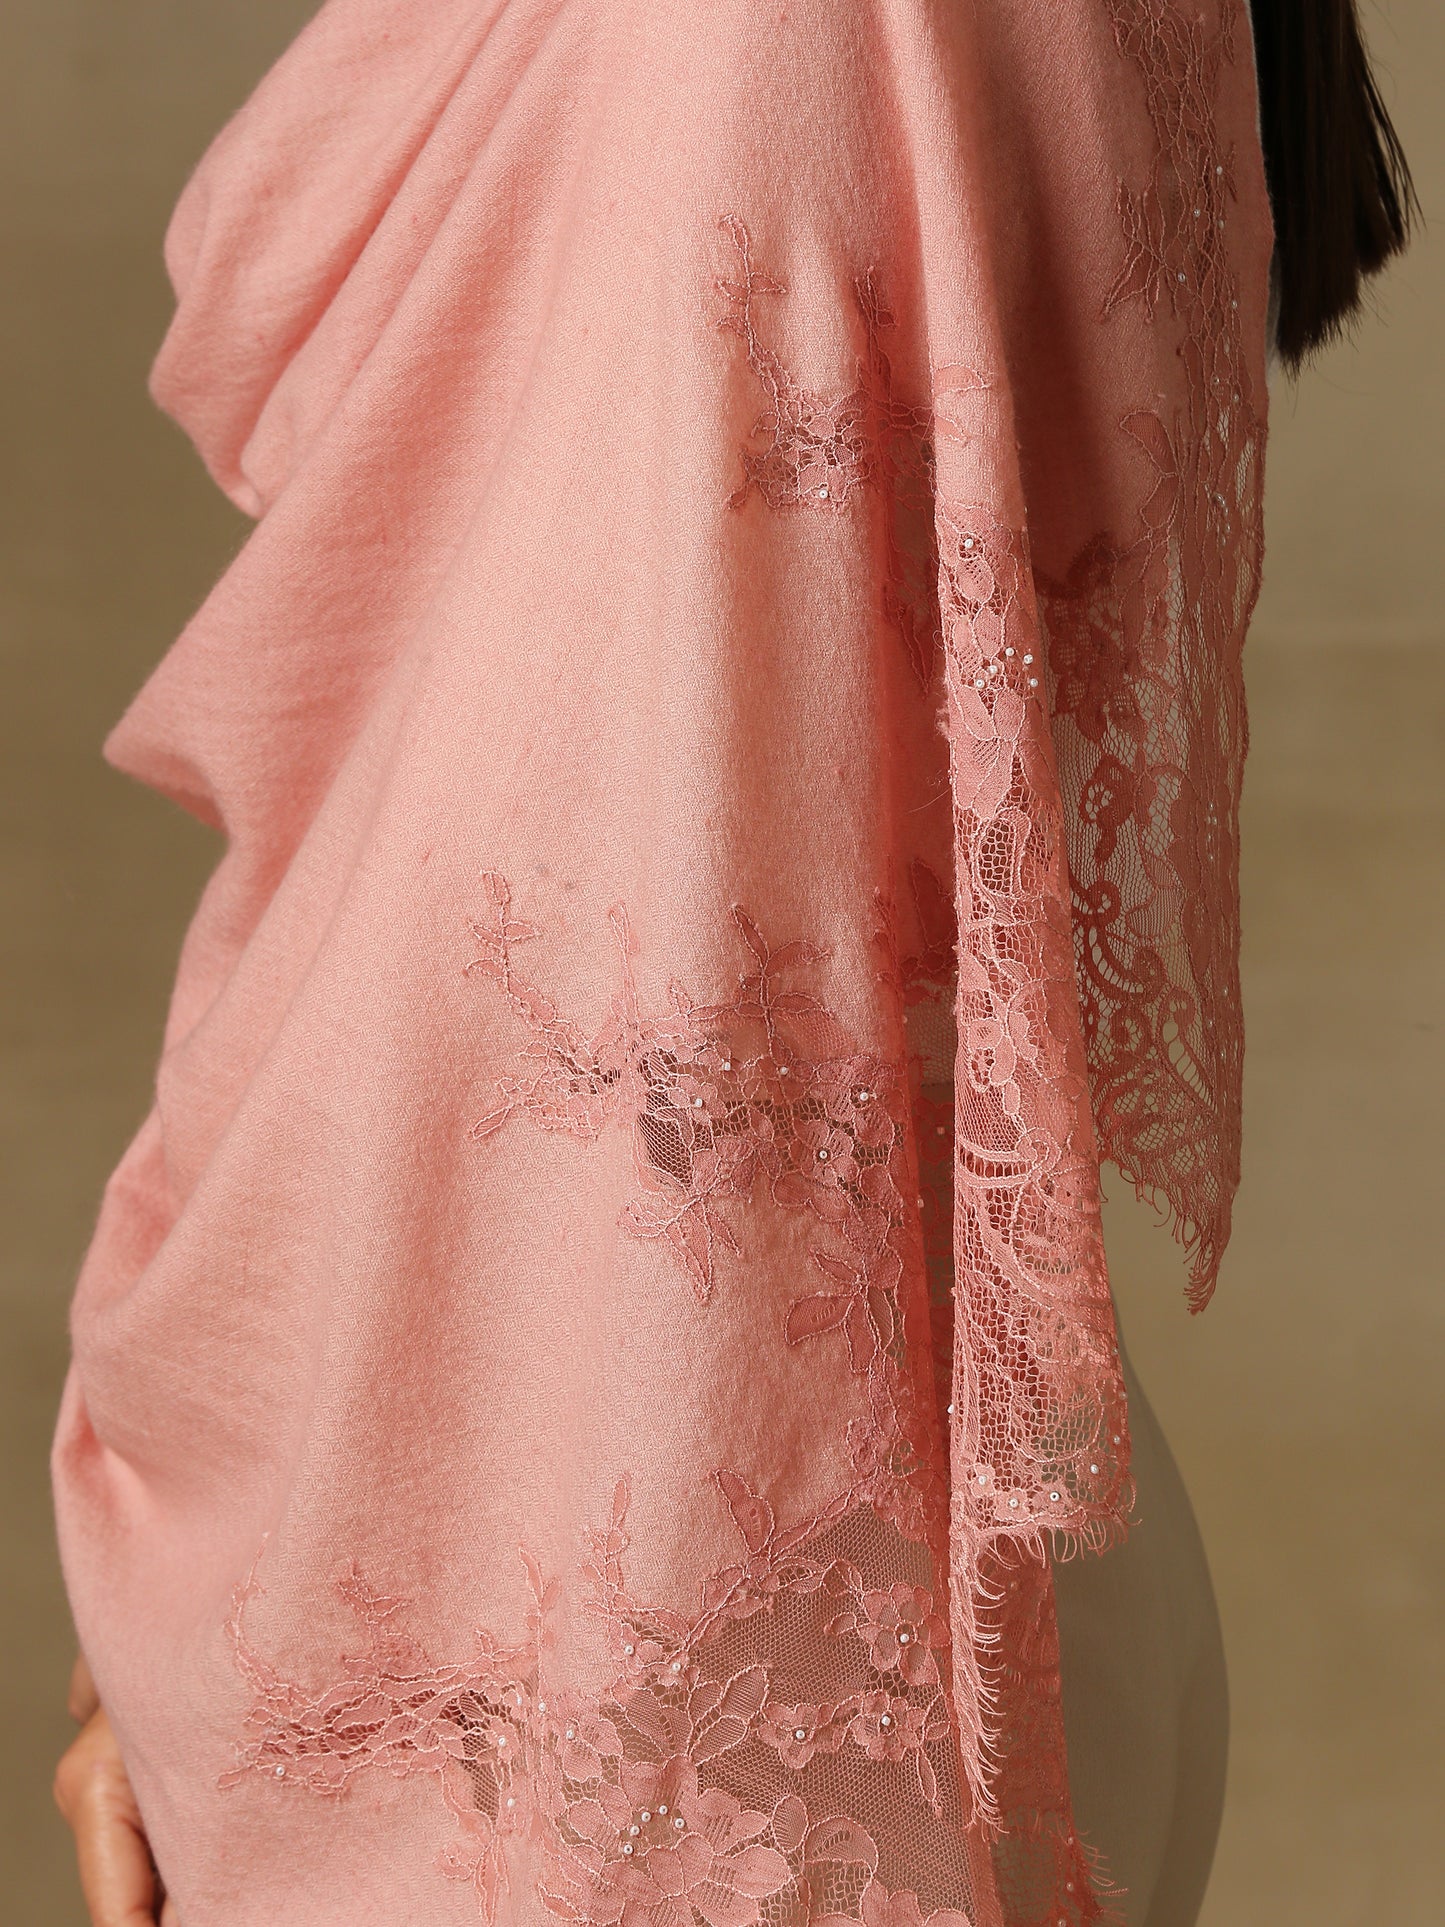 Model is wearing a pashmina stole in a peachy pink, lavishly embellished with floral motifs, made with threadwork, swarovski, pearls, and applique. This stole is from the Elements of spring collection.